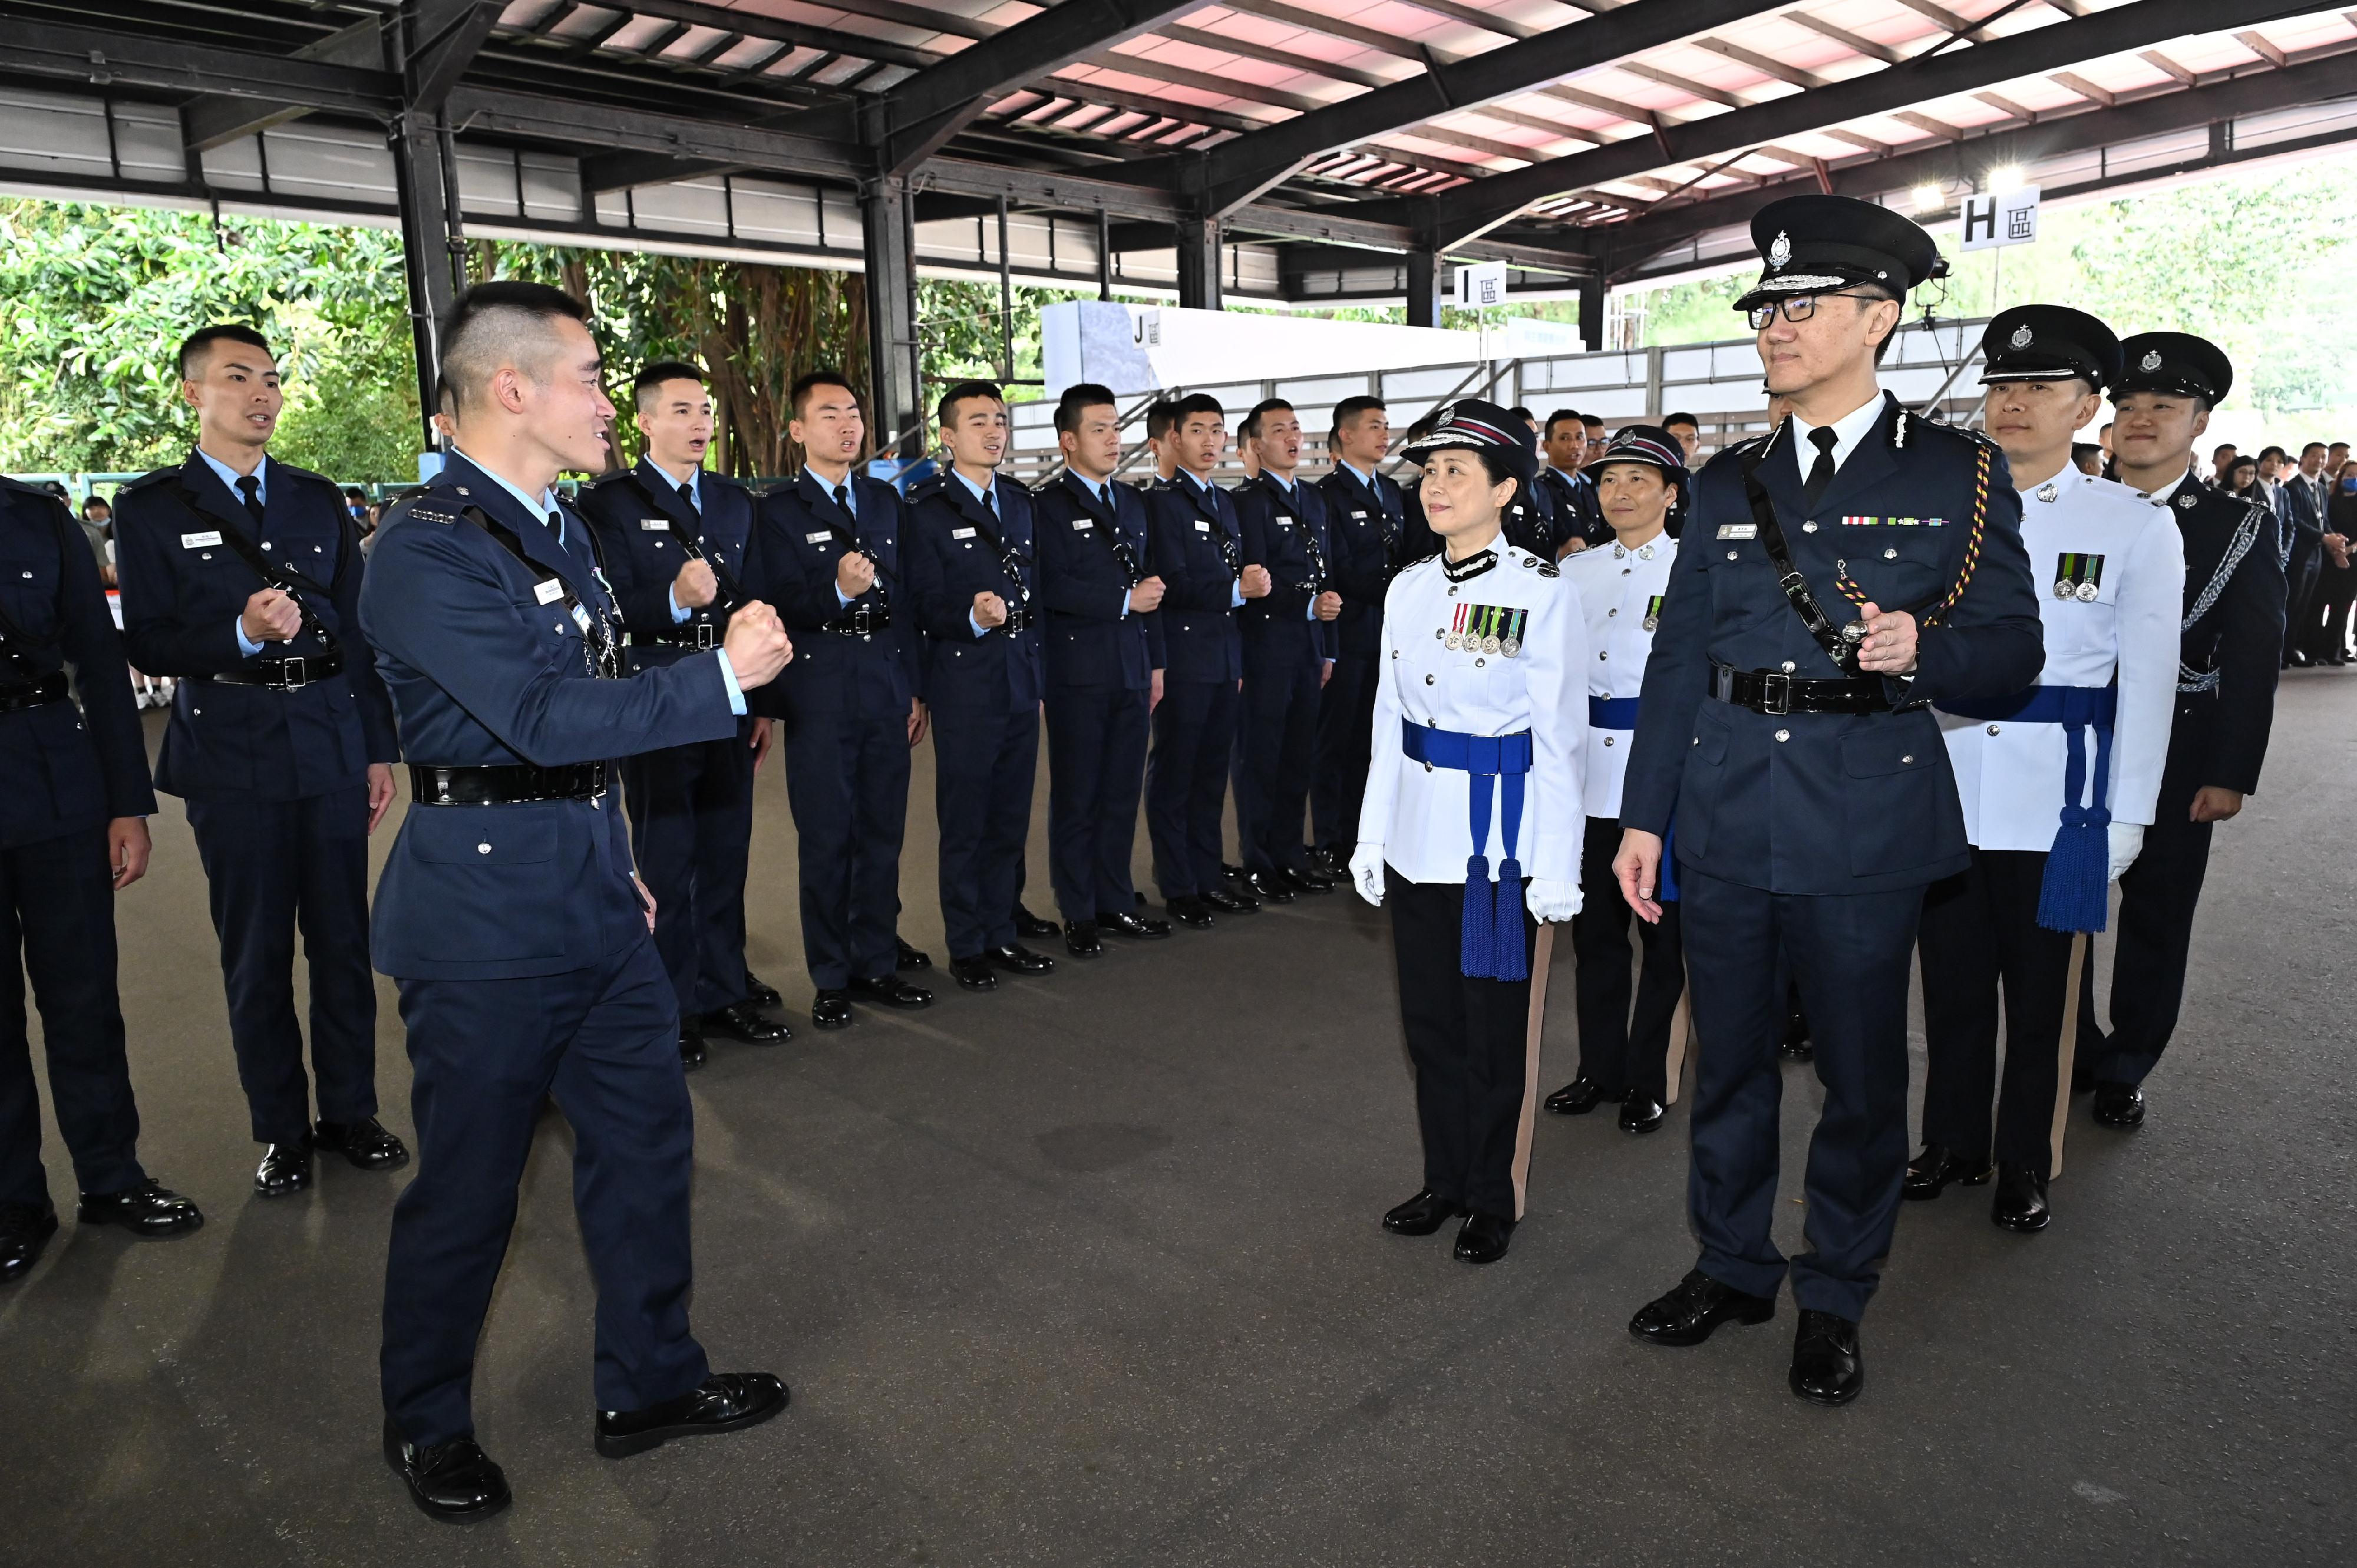 The Commissioner of Police, Mr Siu Chak-yee (third right) and the Deputy Commissioner of Police (National Security), Ms Lau Chi-wai (fifth right), meet graduates after the passing-out parade held at the Hong Kong Police College today (April 22).